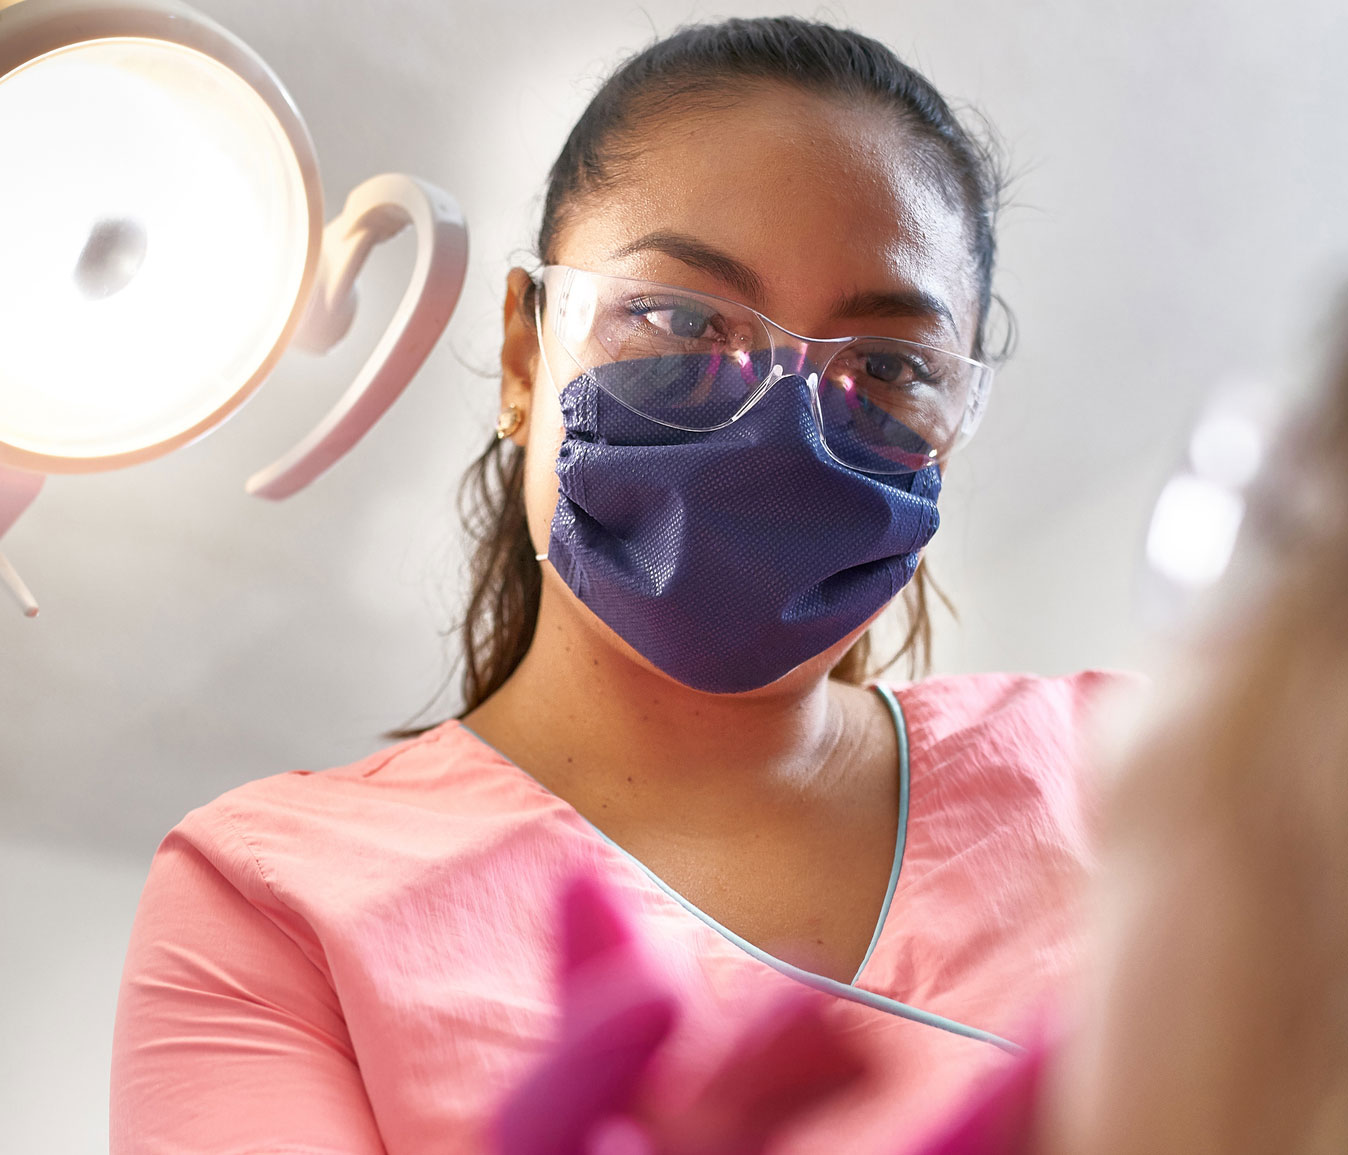 dentist wearing mask looking at patient